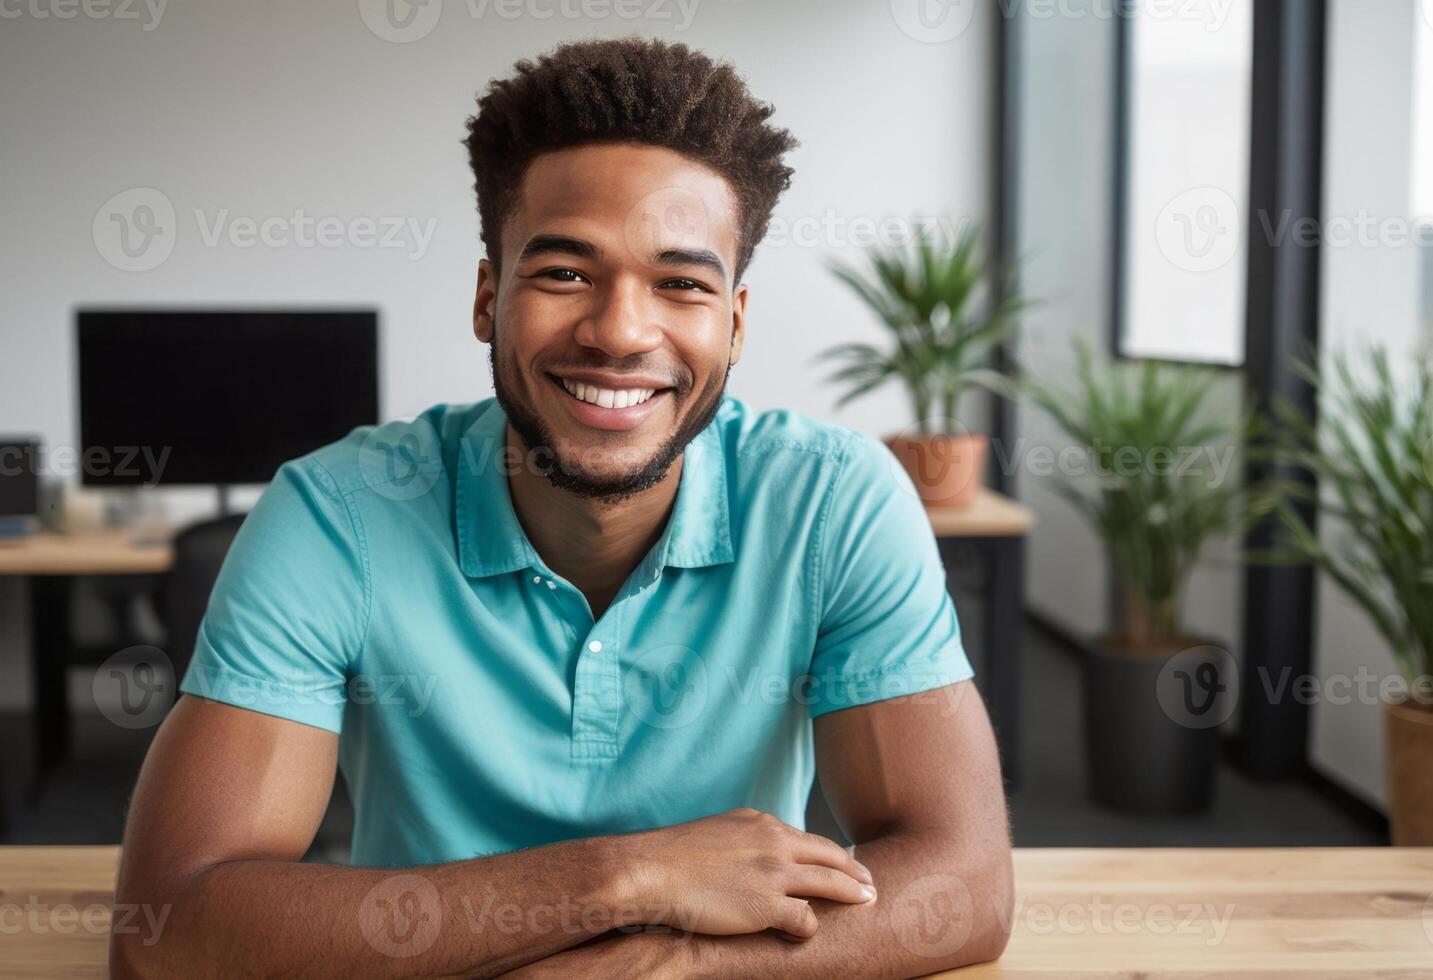 AI Generated A young man with a friendly smile sits casually at a desk. His teal polo shirt is relaxed yet professional for a business casual environment. photo